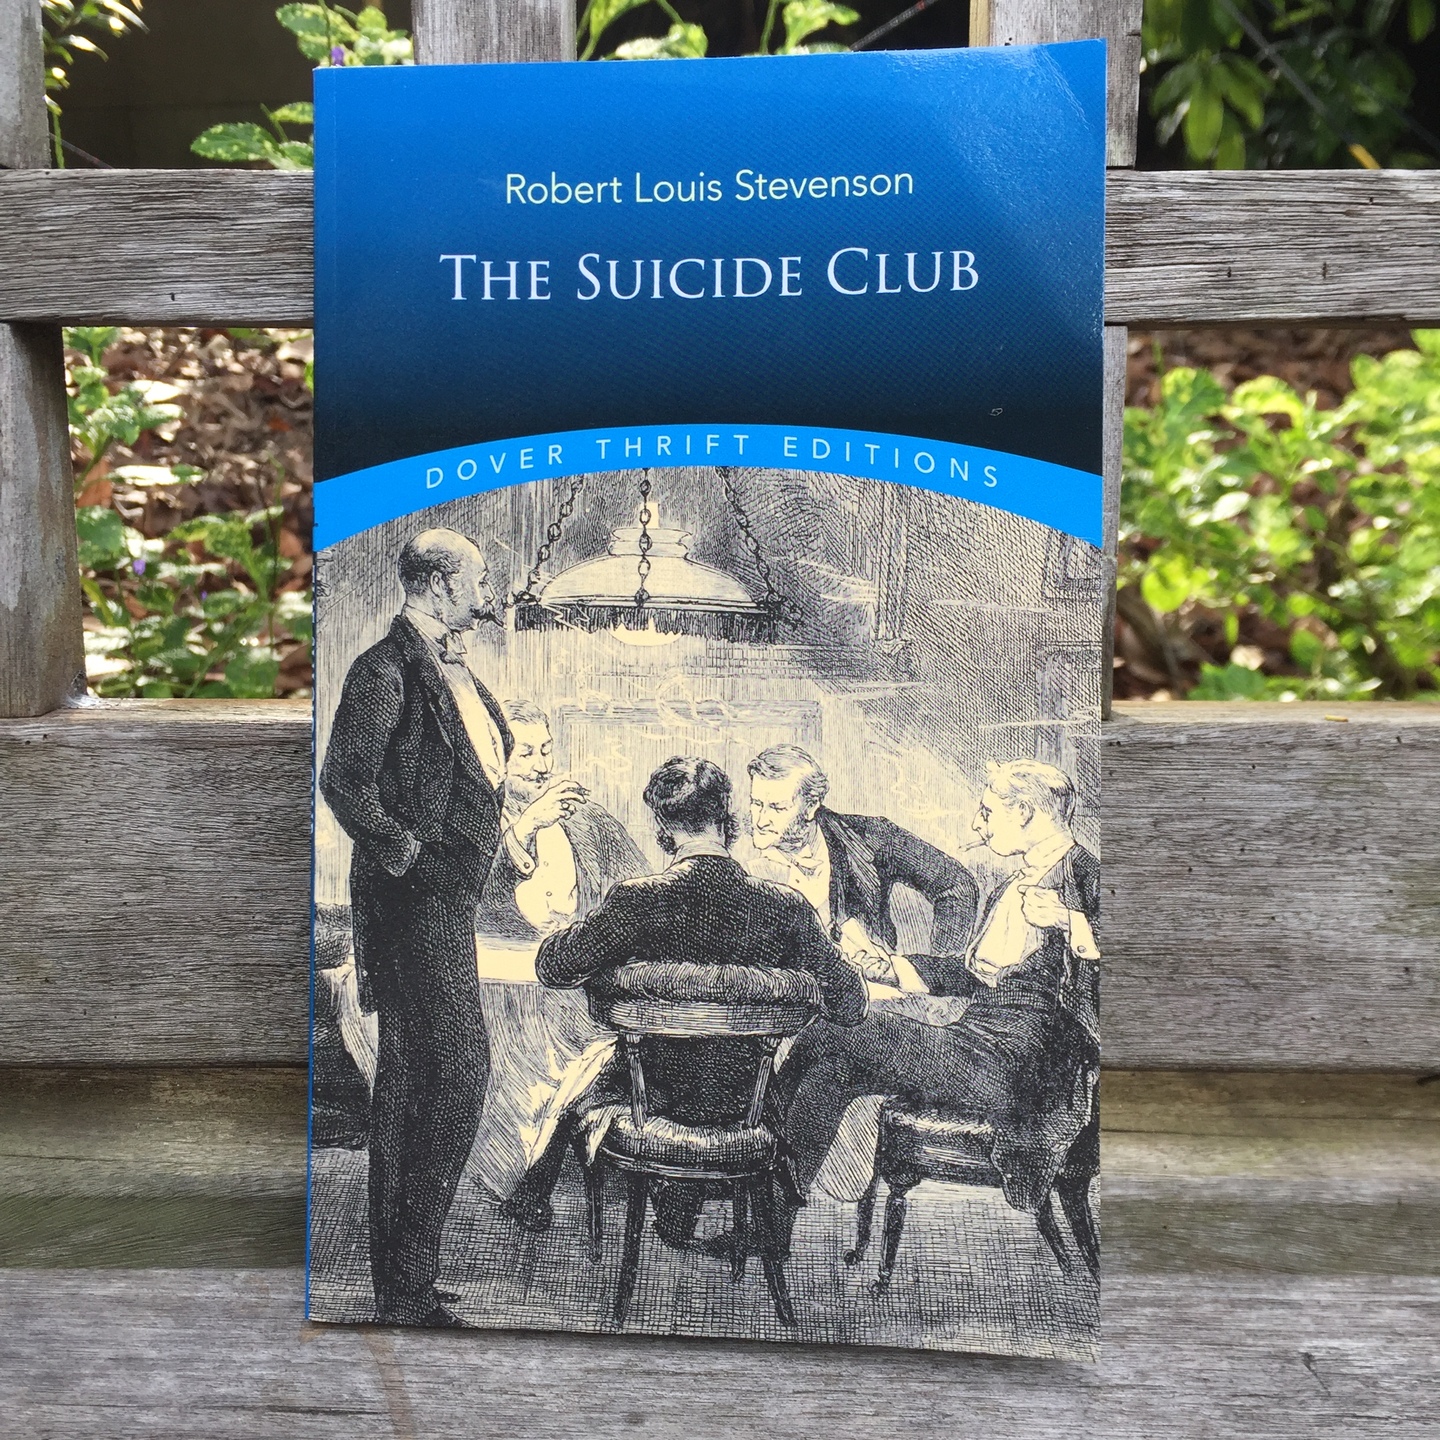 The Suicide Club by Robert Louise Stevenson [Paperback]